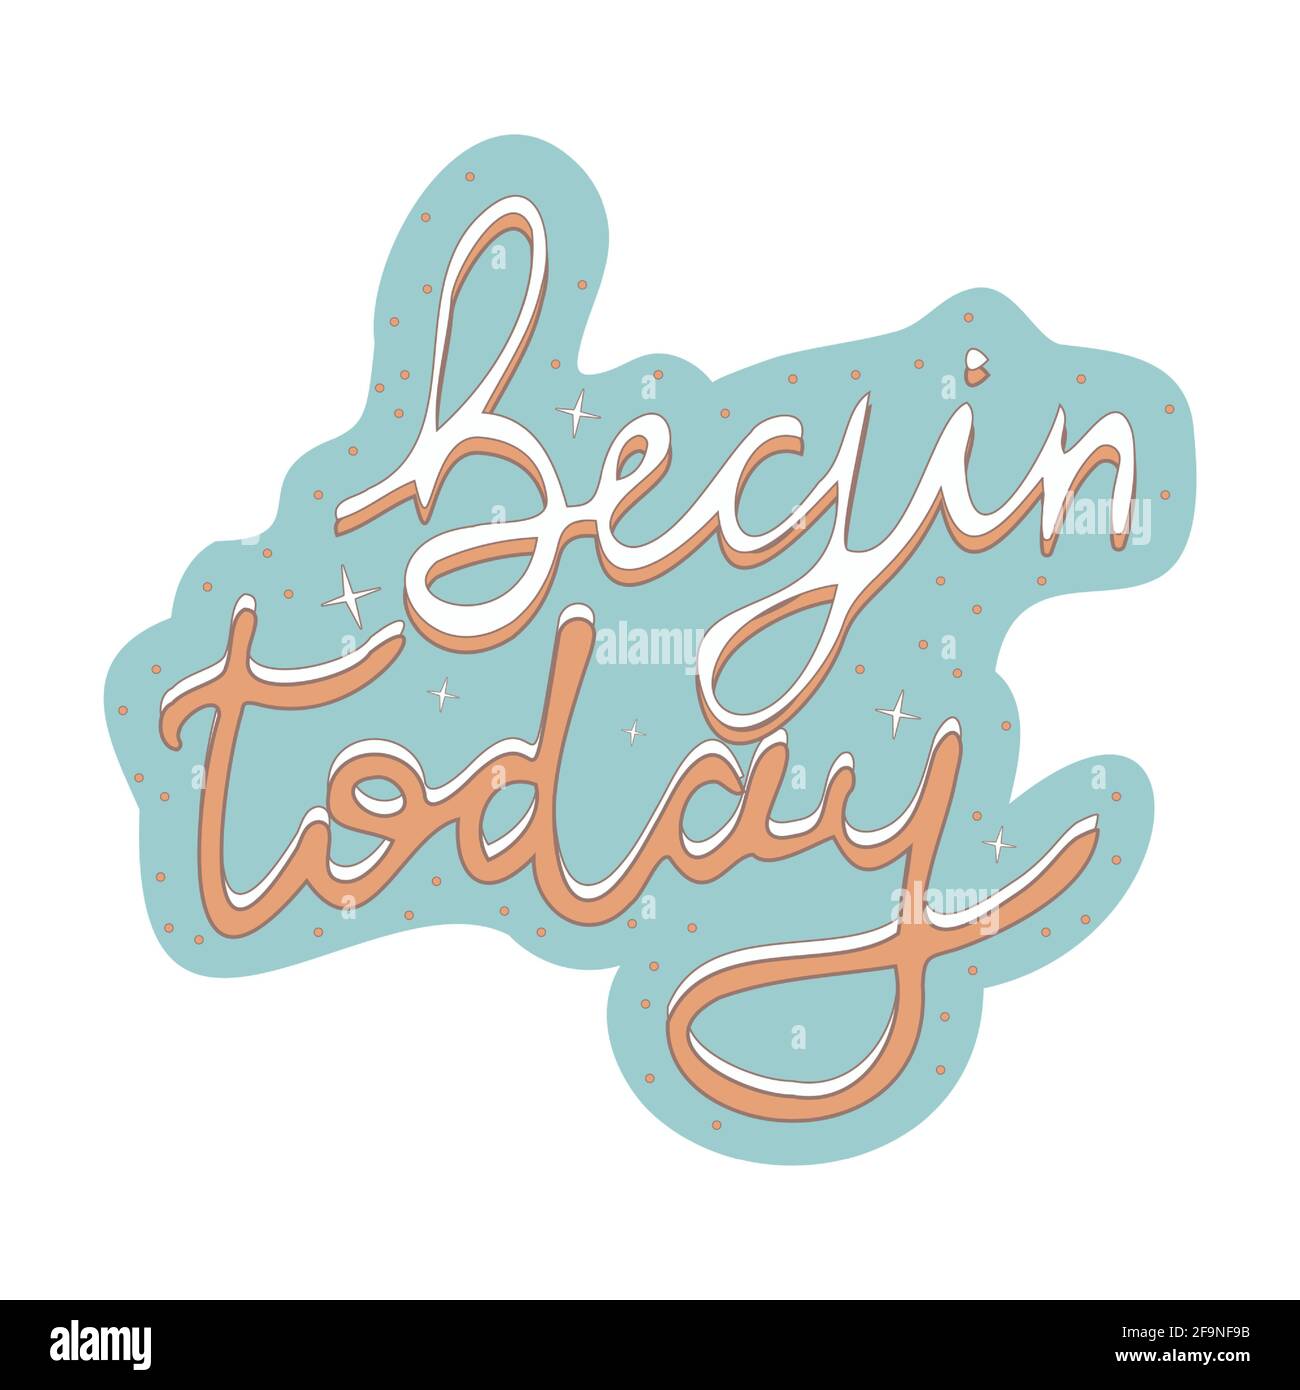 Begin Today retro style, vintage motivation print, decoration isolated on white background. Inspirational quote, badge. Vector illustration Stock Vector